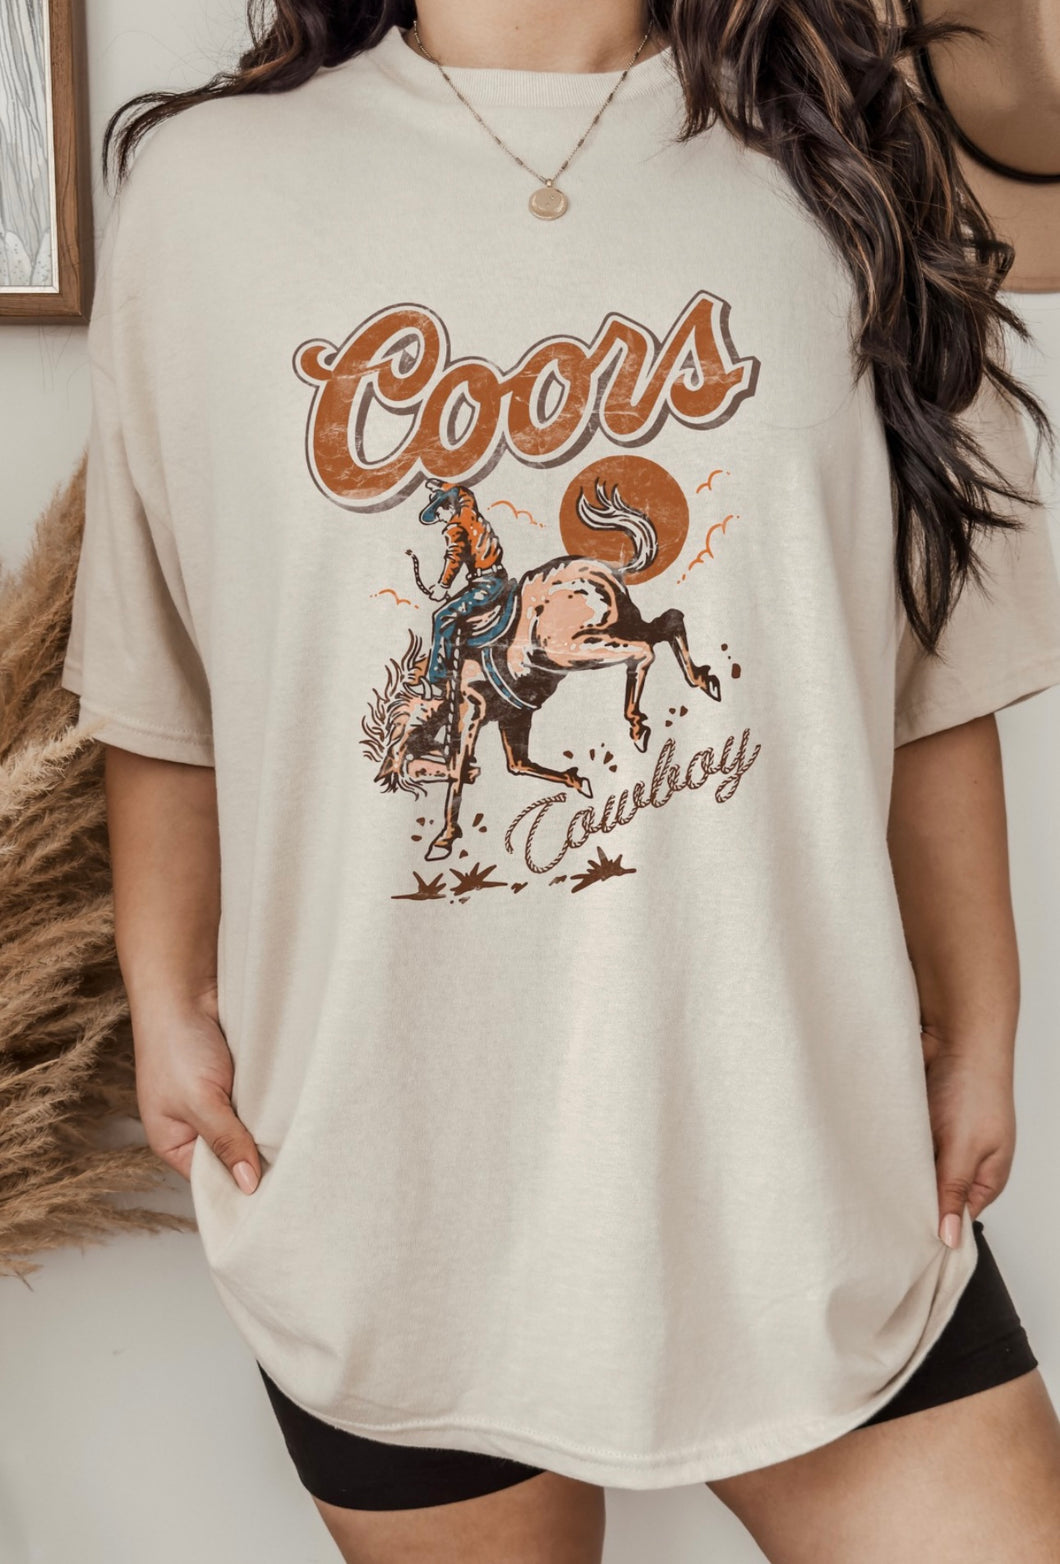 Coors Cowgirl Tee